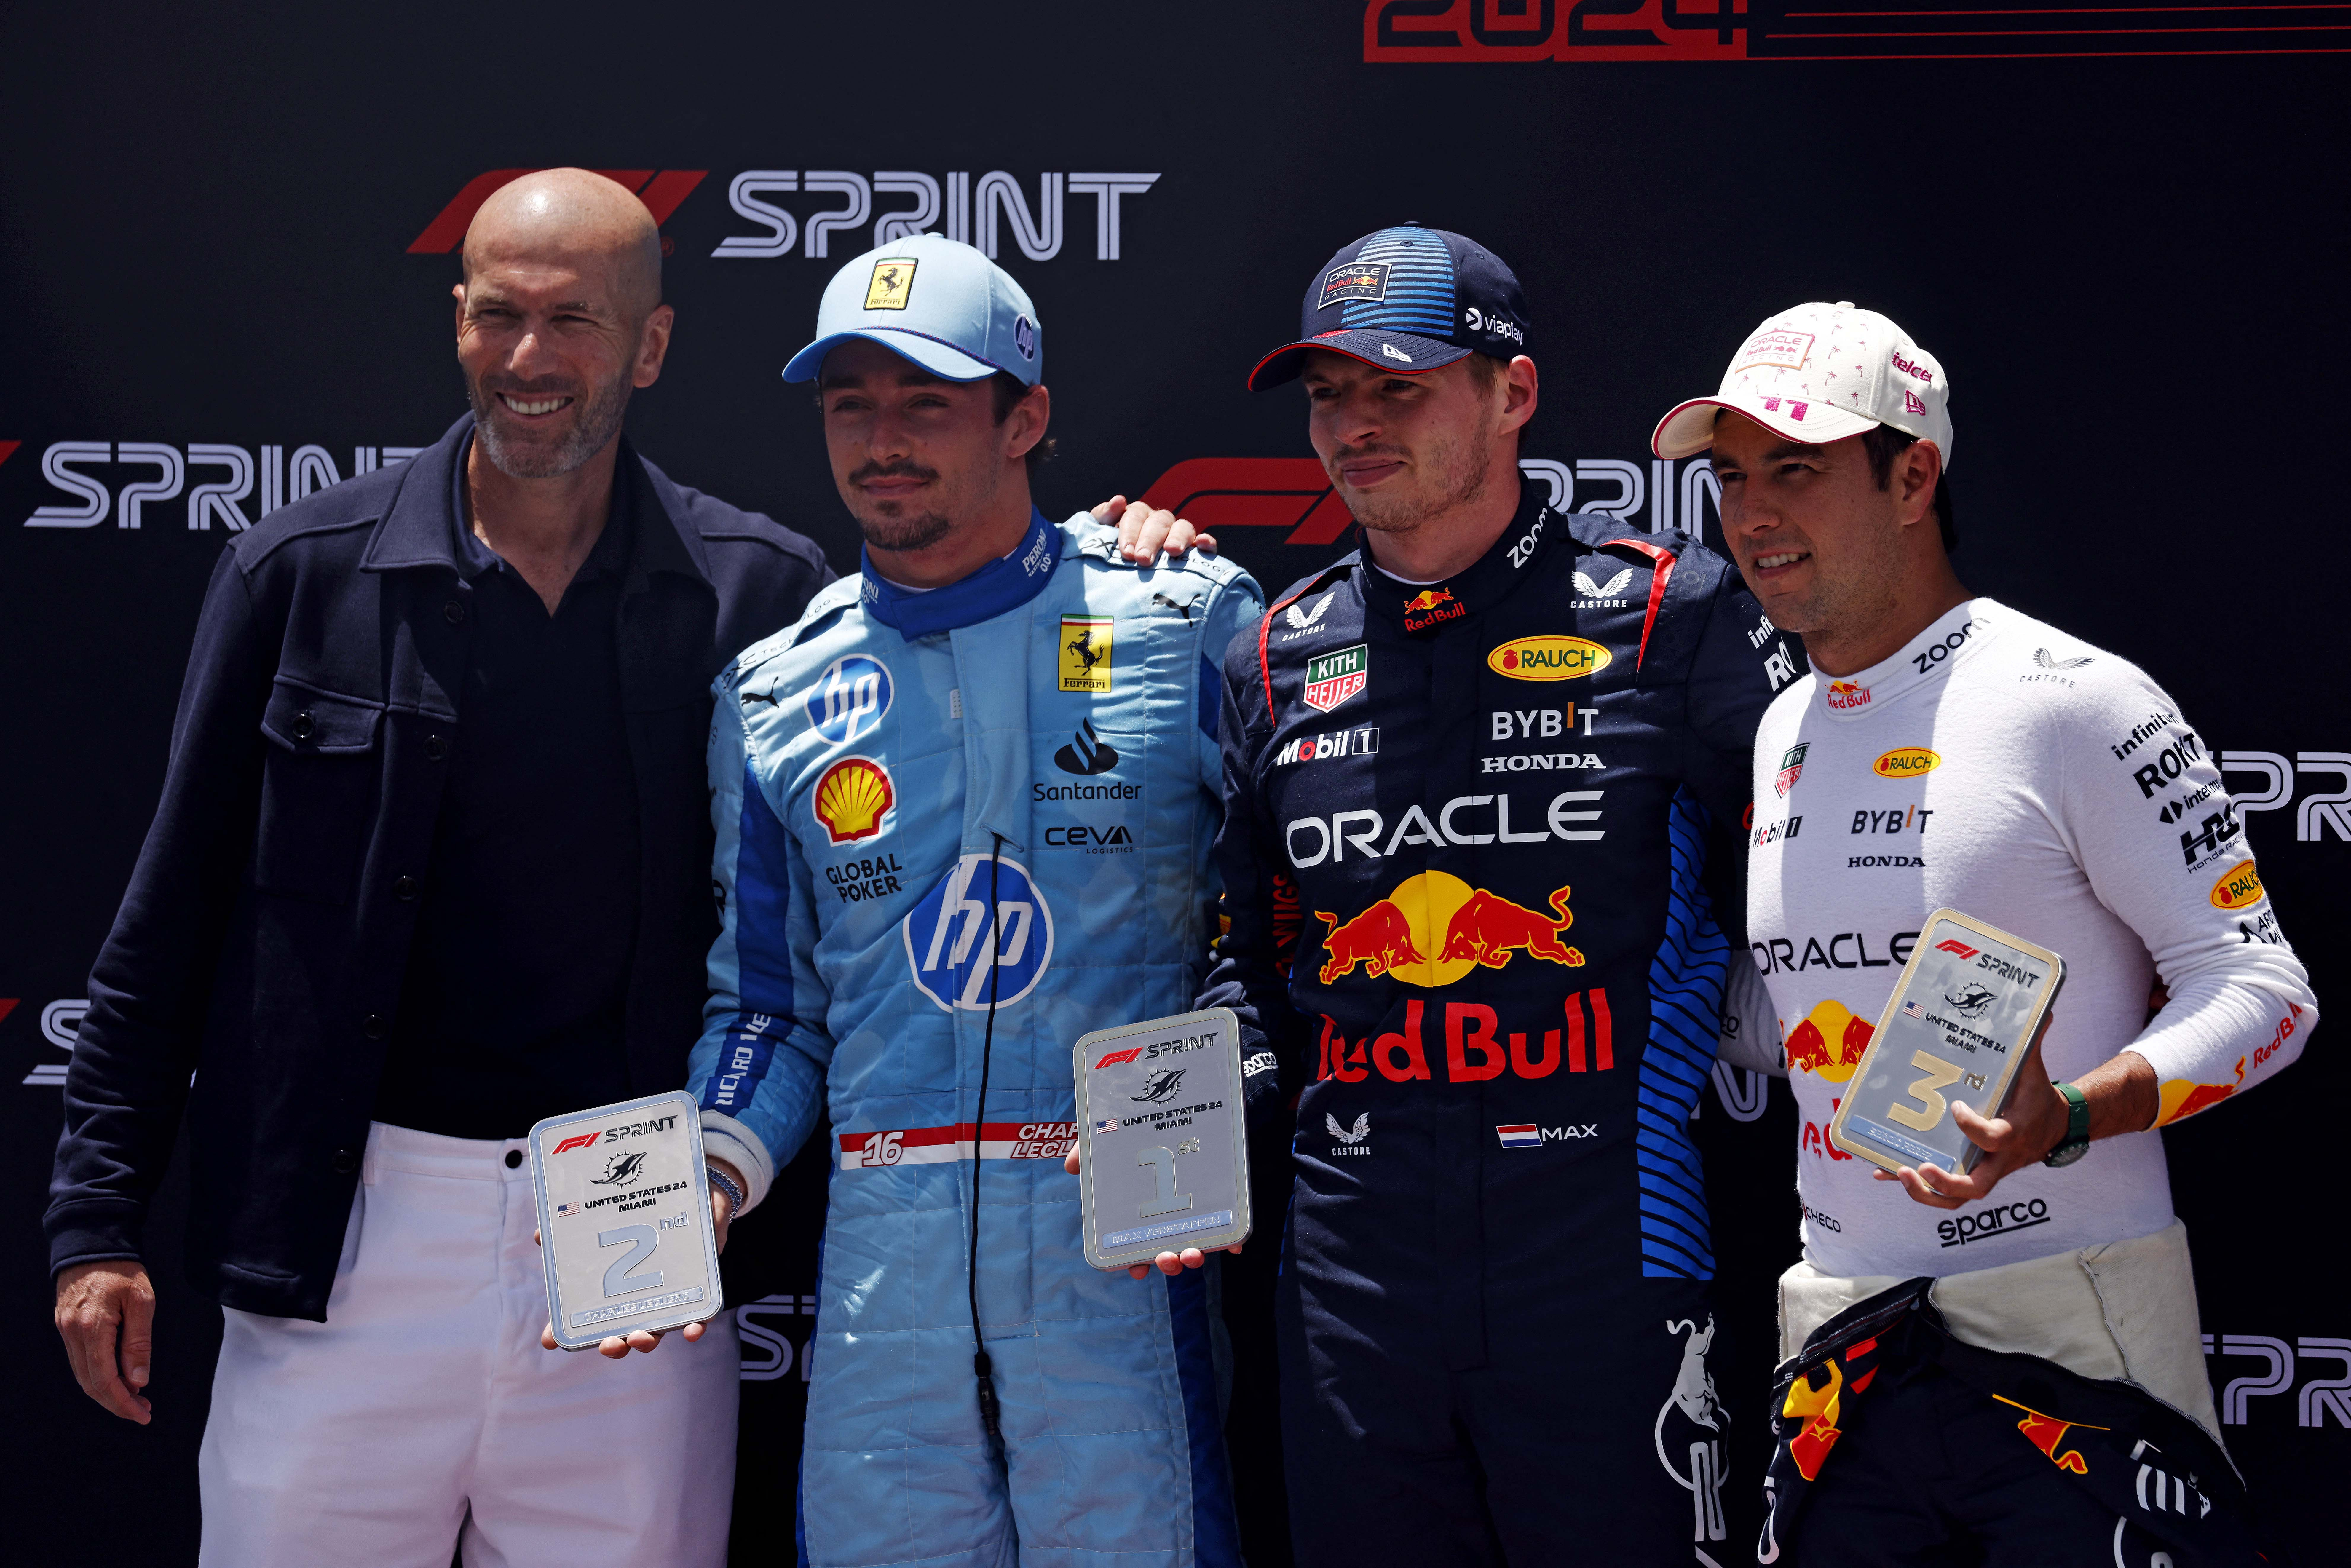 Footy legend Zinedine Zidane poses with Charles Leclerc, Max Verstappen and Sergio Perez